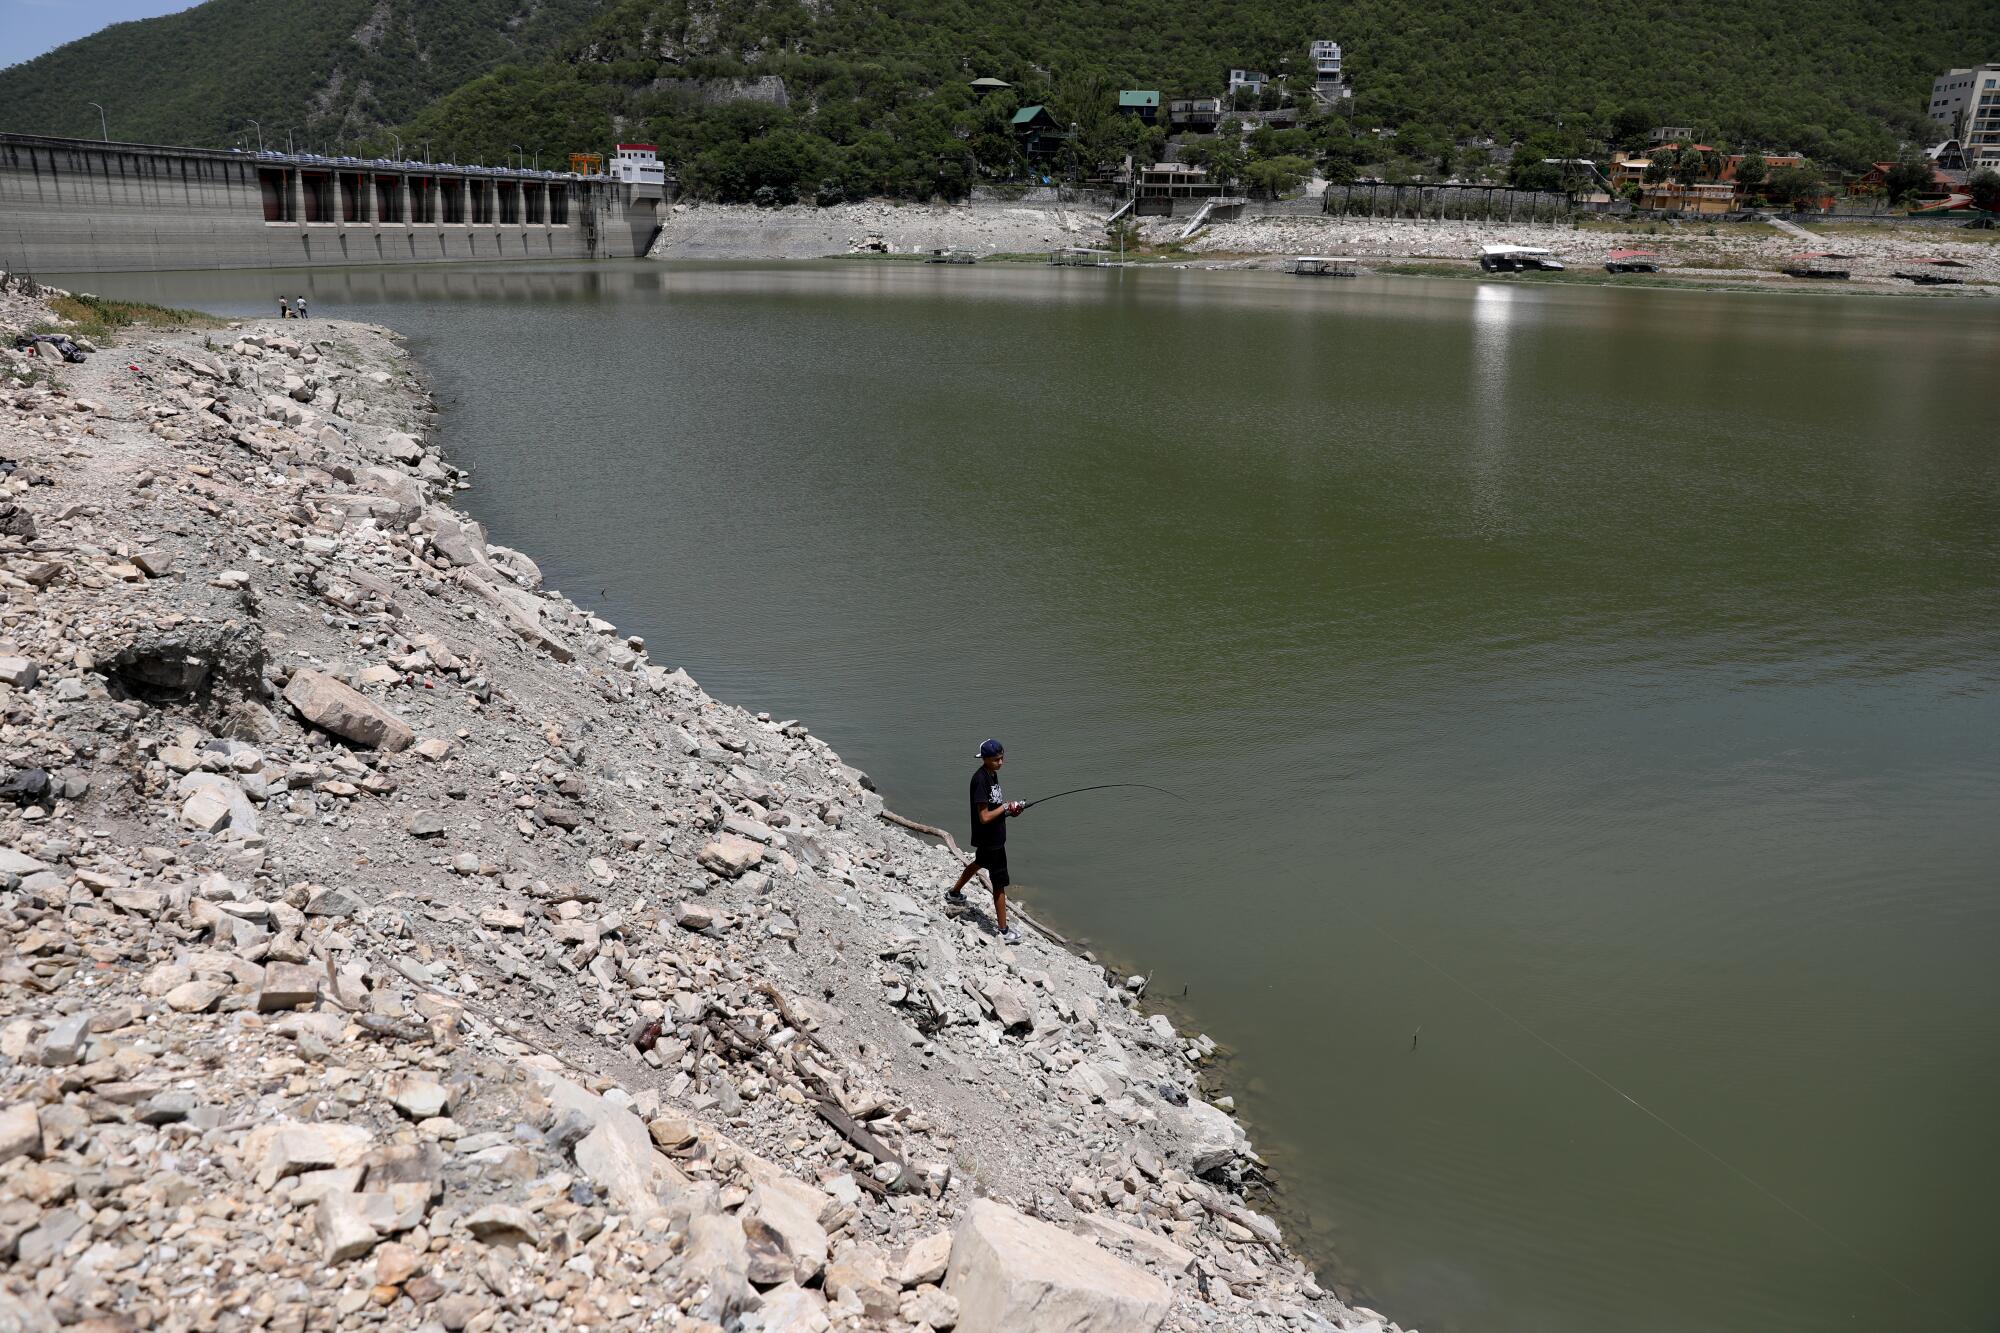 A  boy fishes in a low reservoir with a dam in the distance